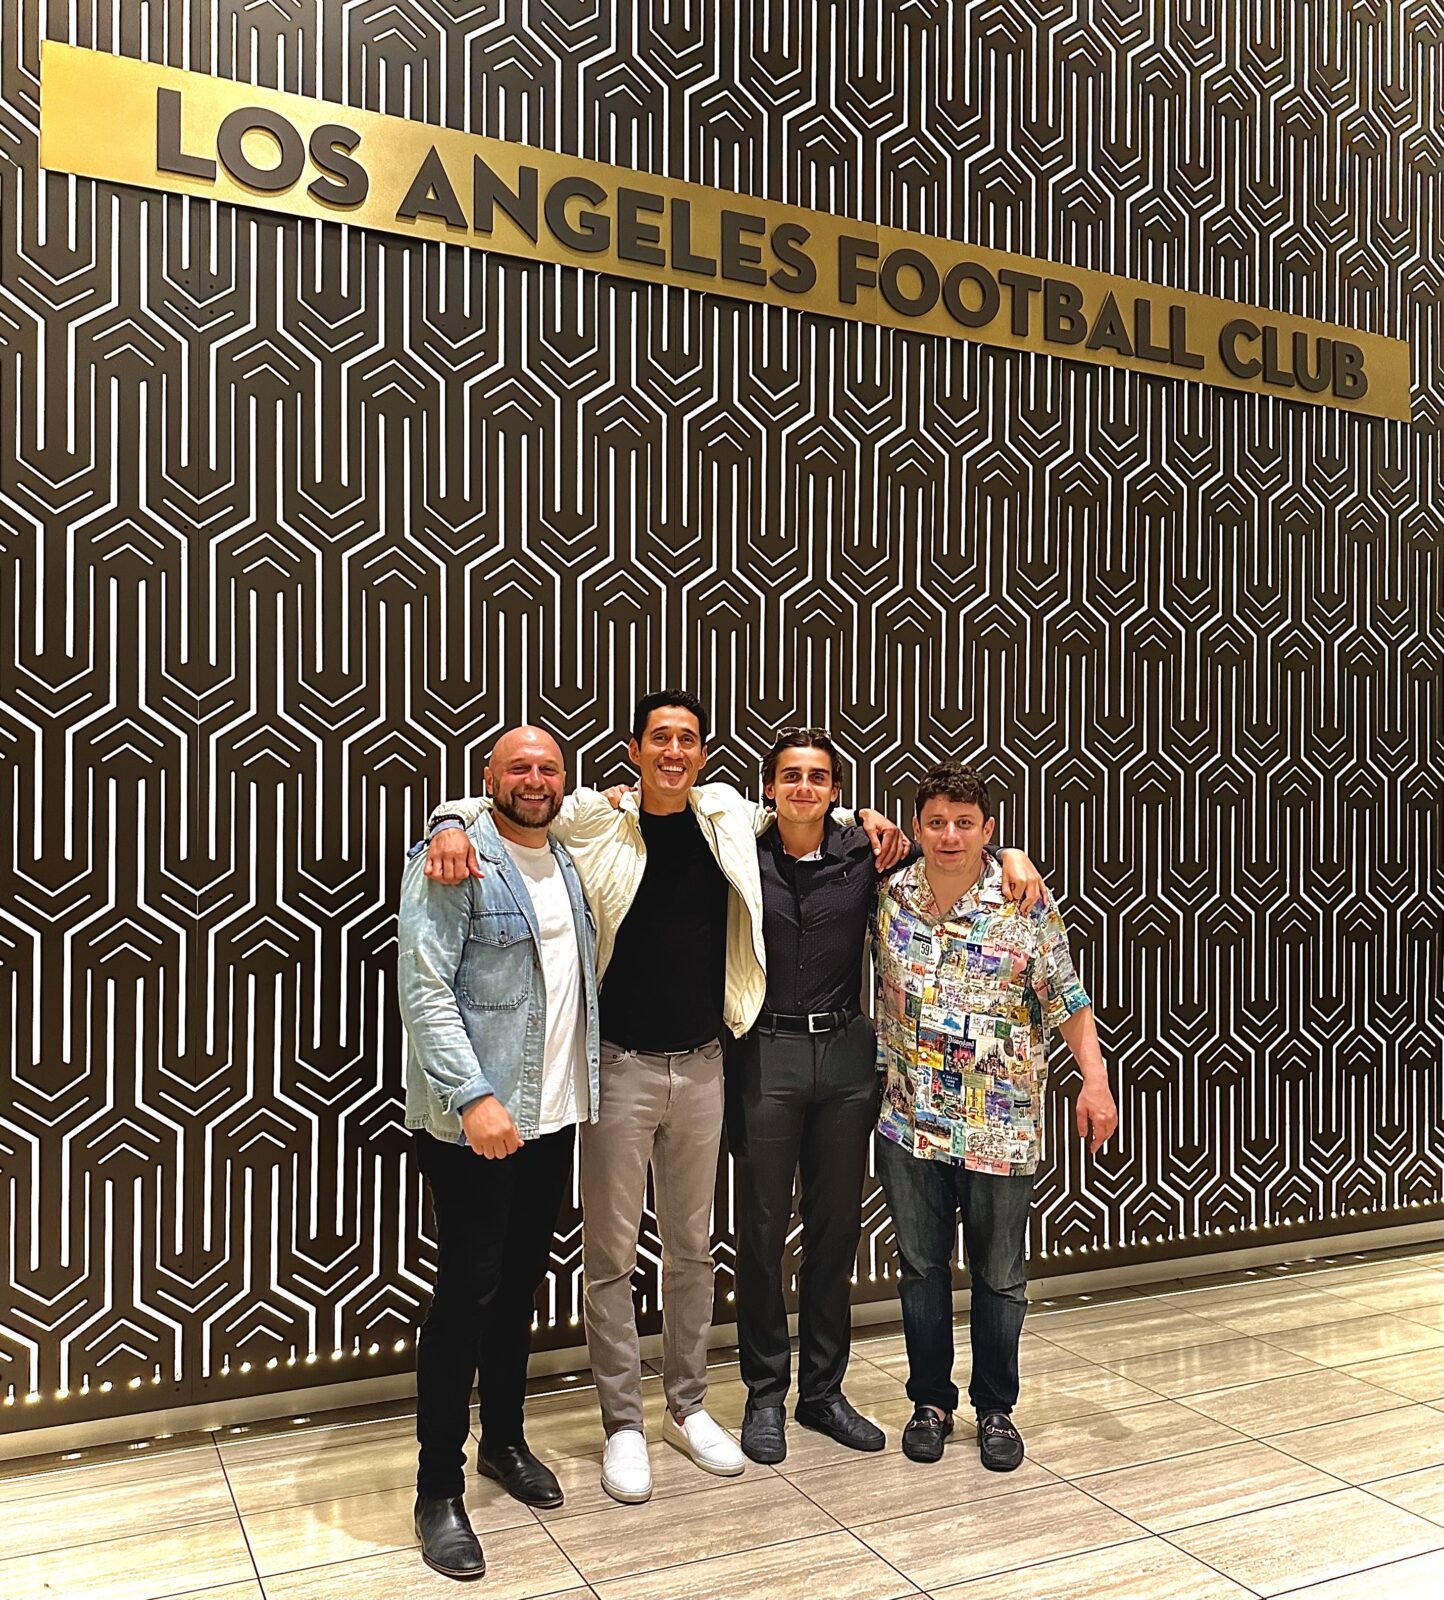 Paul Salazar Group Photo In Front Of Los Angeles Football Club Sign